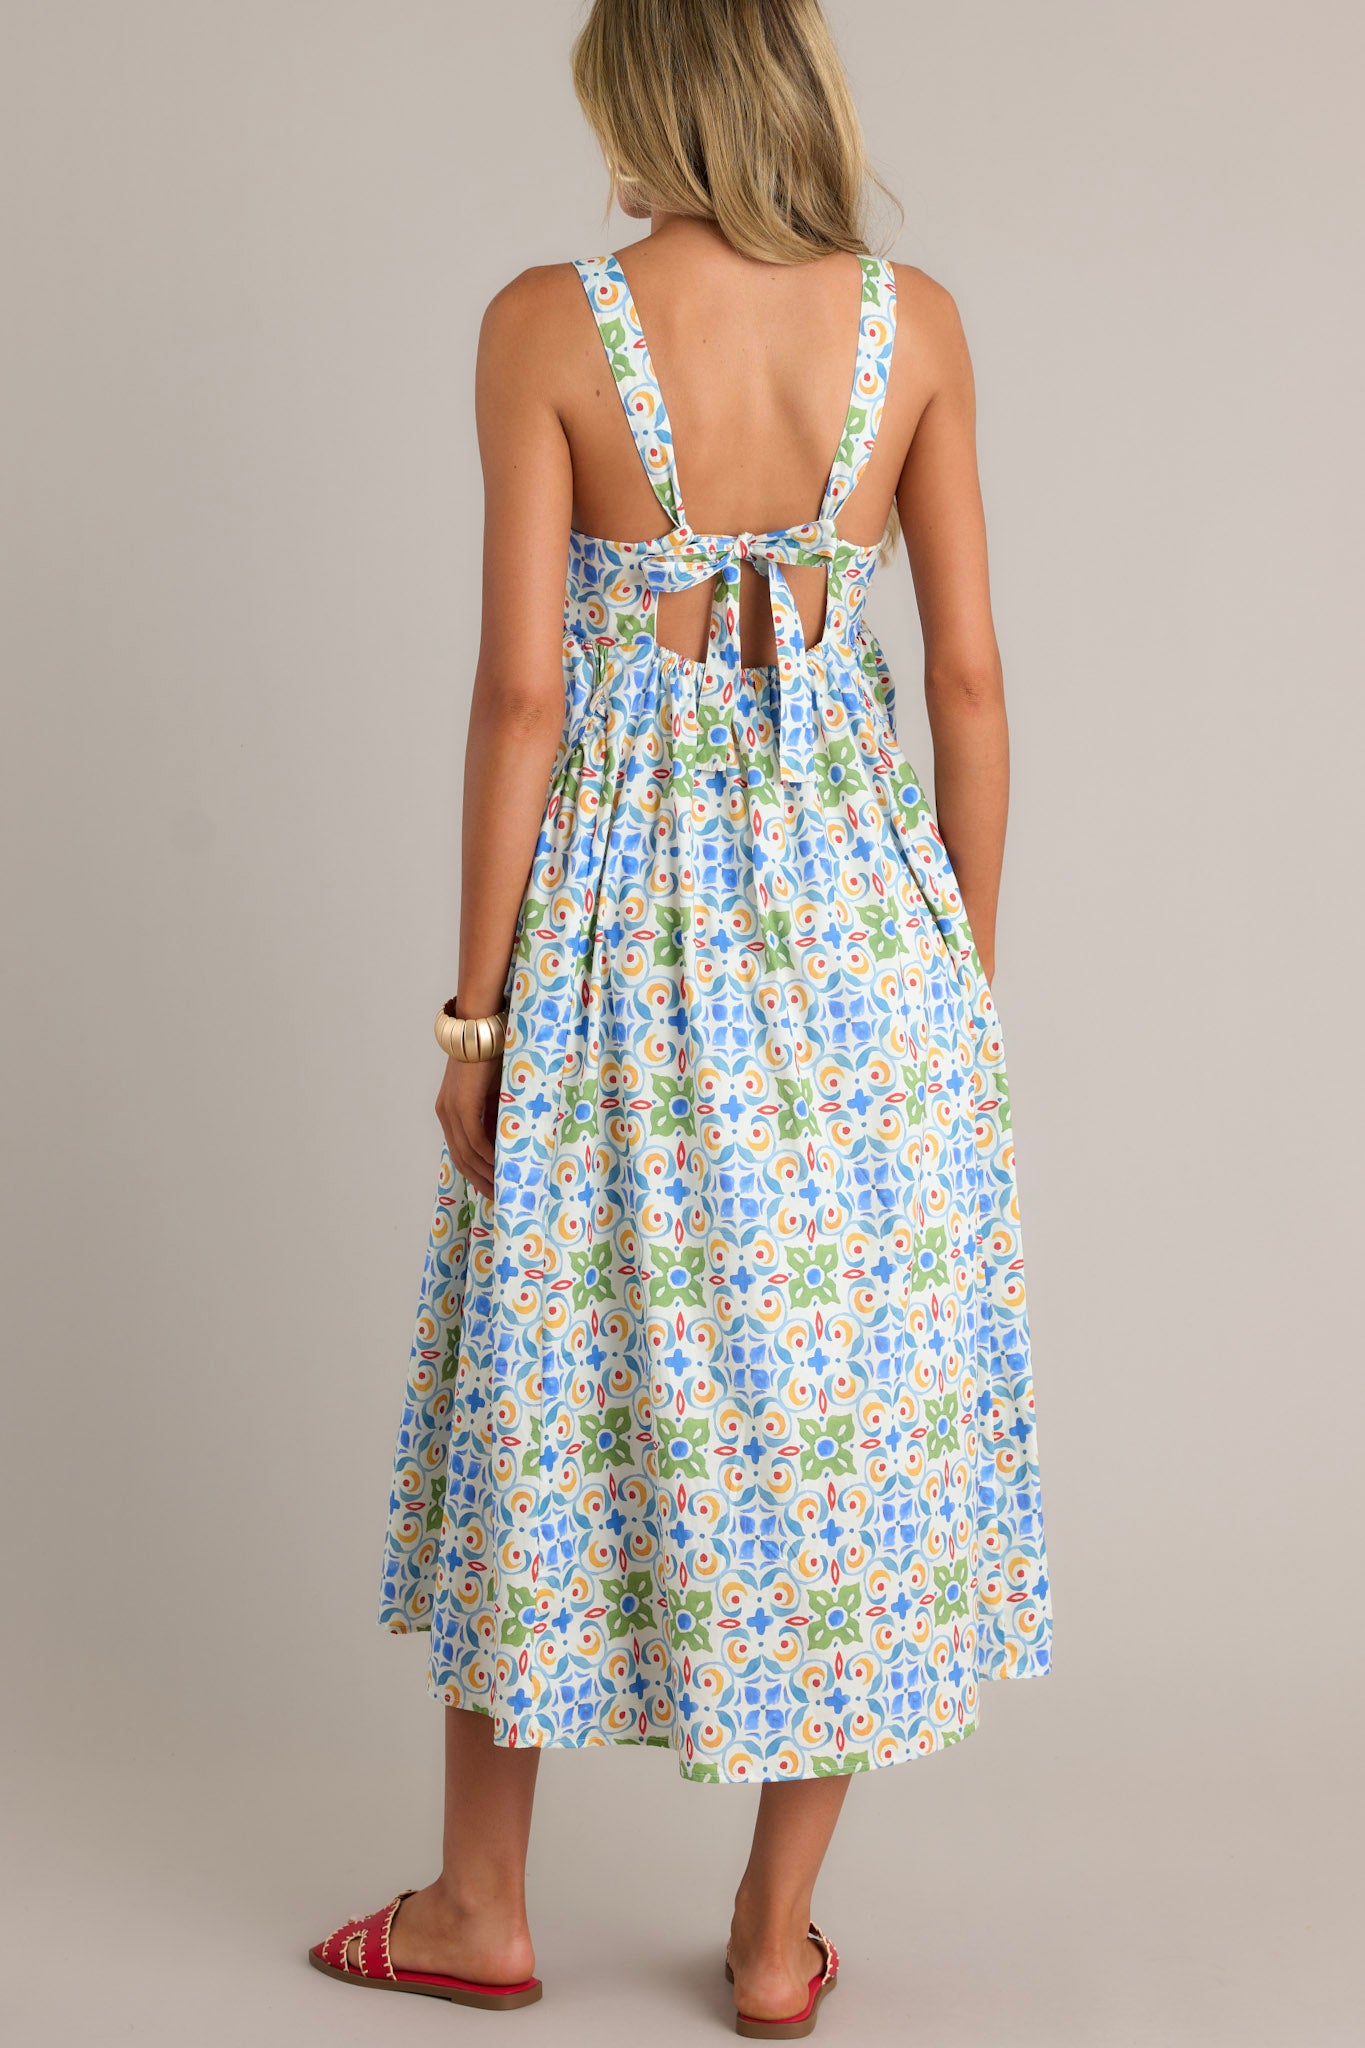 Back view of a white midi dress highlighting the self-tie adjustable straps, colorful pattern, and overall fit.